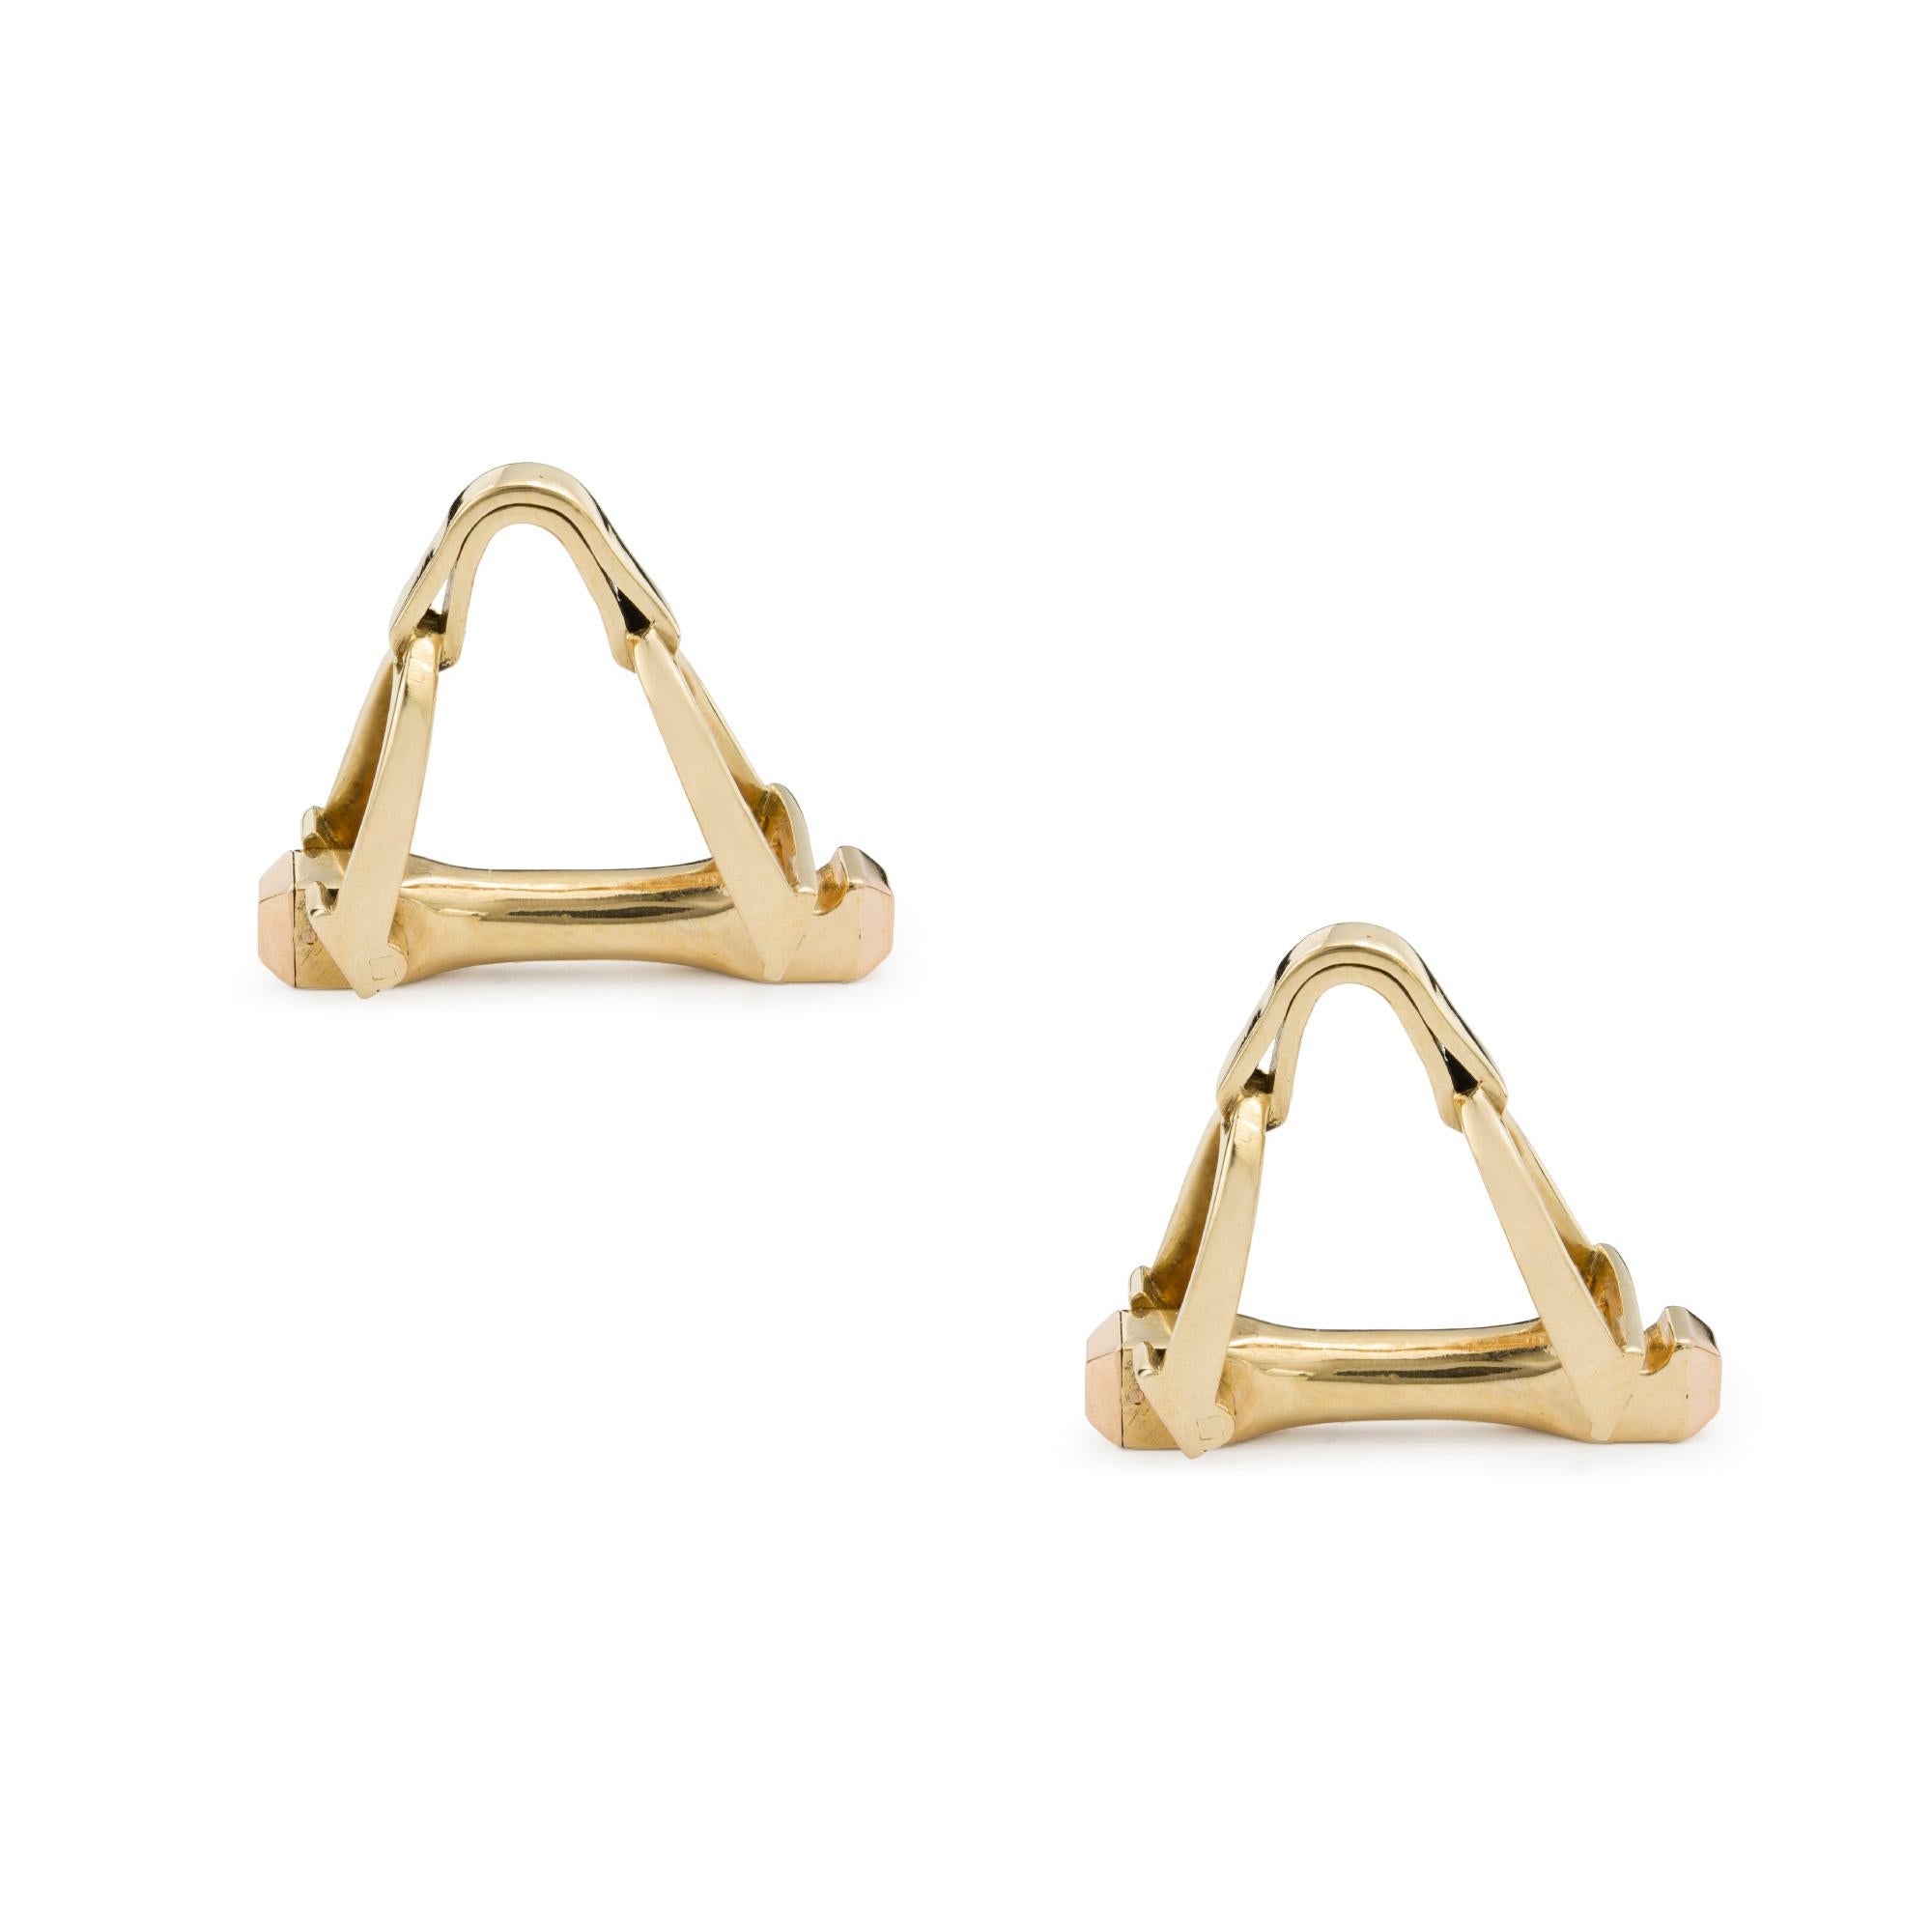 A pair of gold stirrup cufflinks, each link designed as a pair of stirrups forming a triangular link connected to a gold bar, all in yellow gold, bearing French marks, later hallmarked 18ct gold London, 2016, measuring approximately 2.4 x 1.9cm,